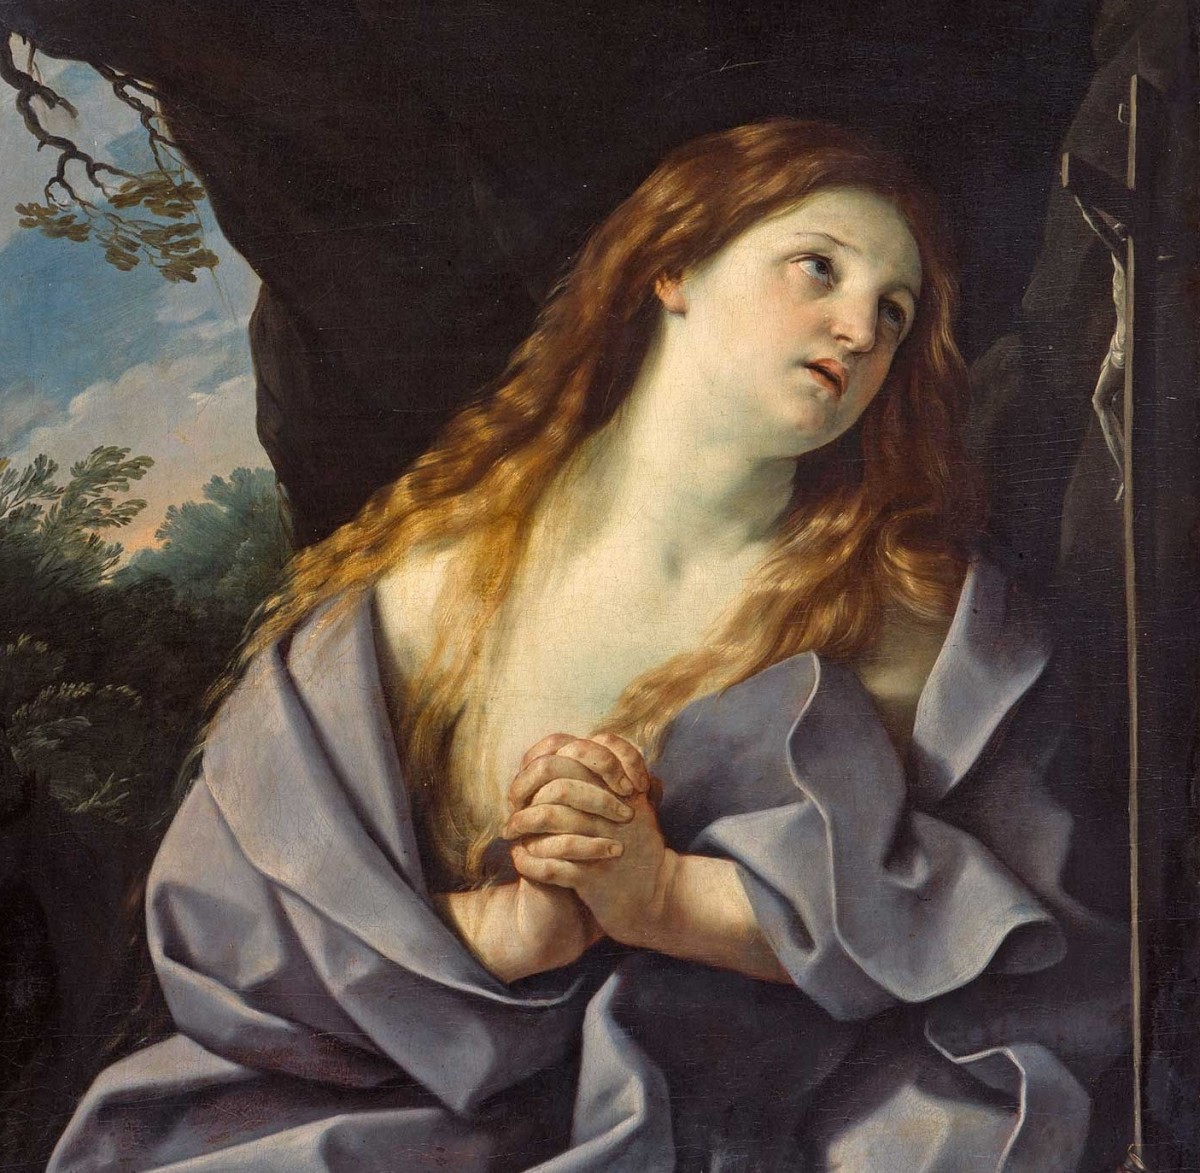 Mary Magdalene: Follower of Jesus Christ in the Bible